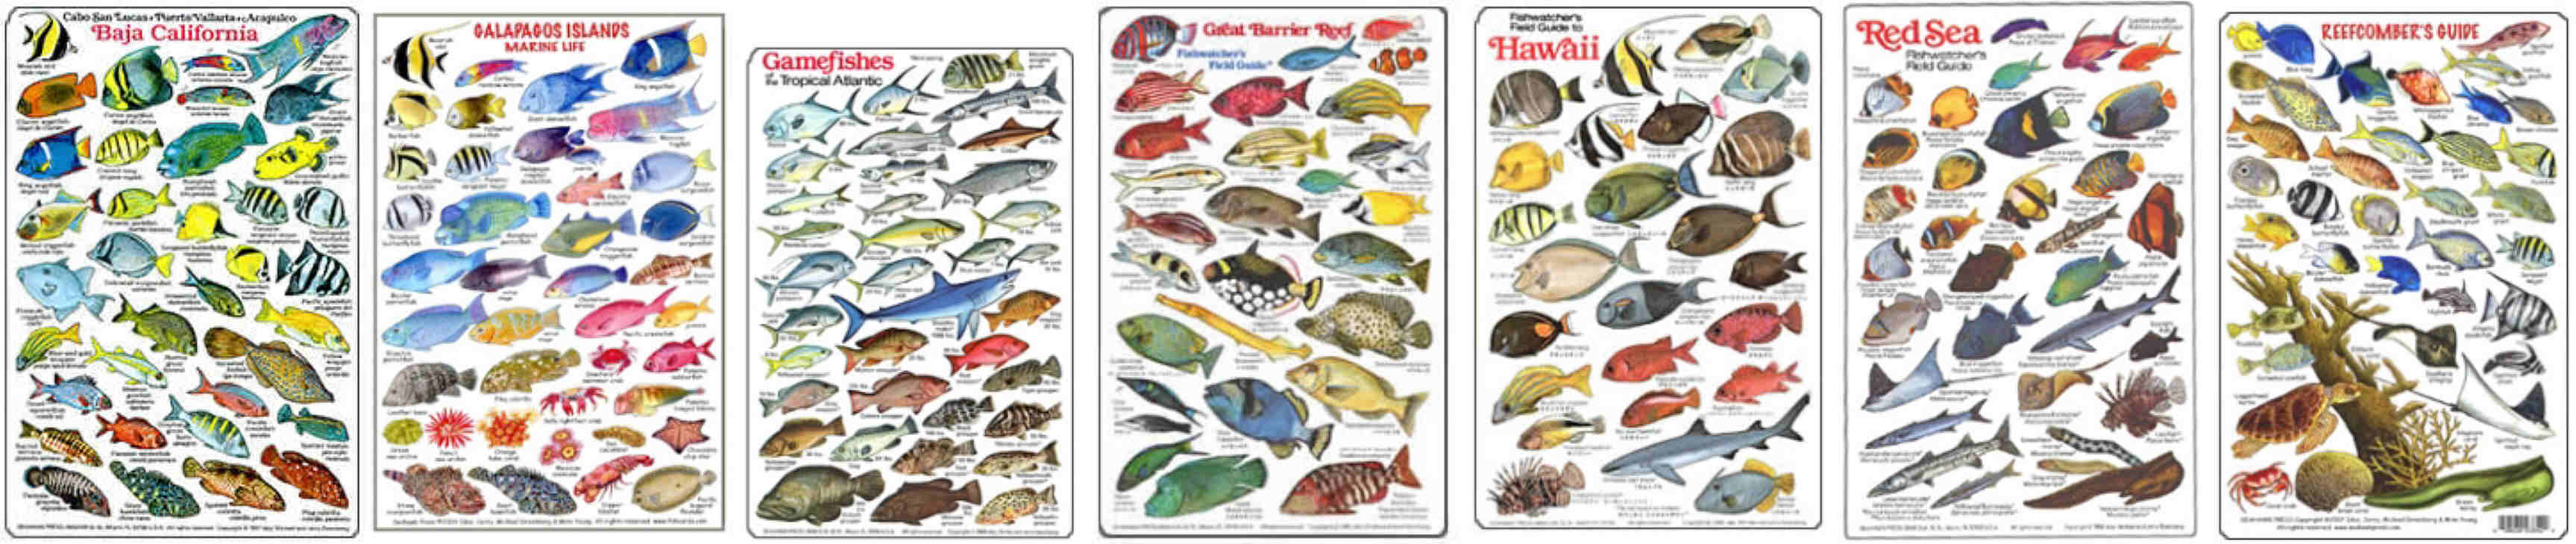 Fish Identification Guides,diving slates  and fish charts